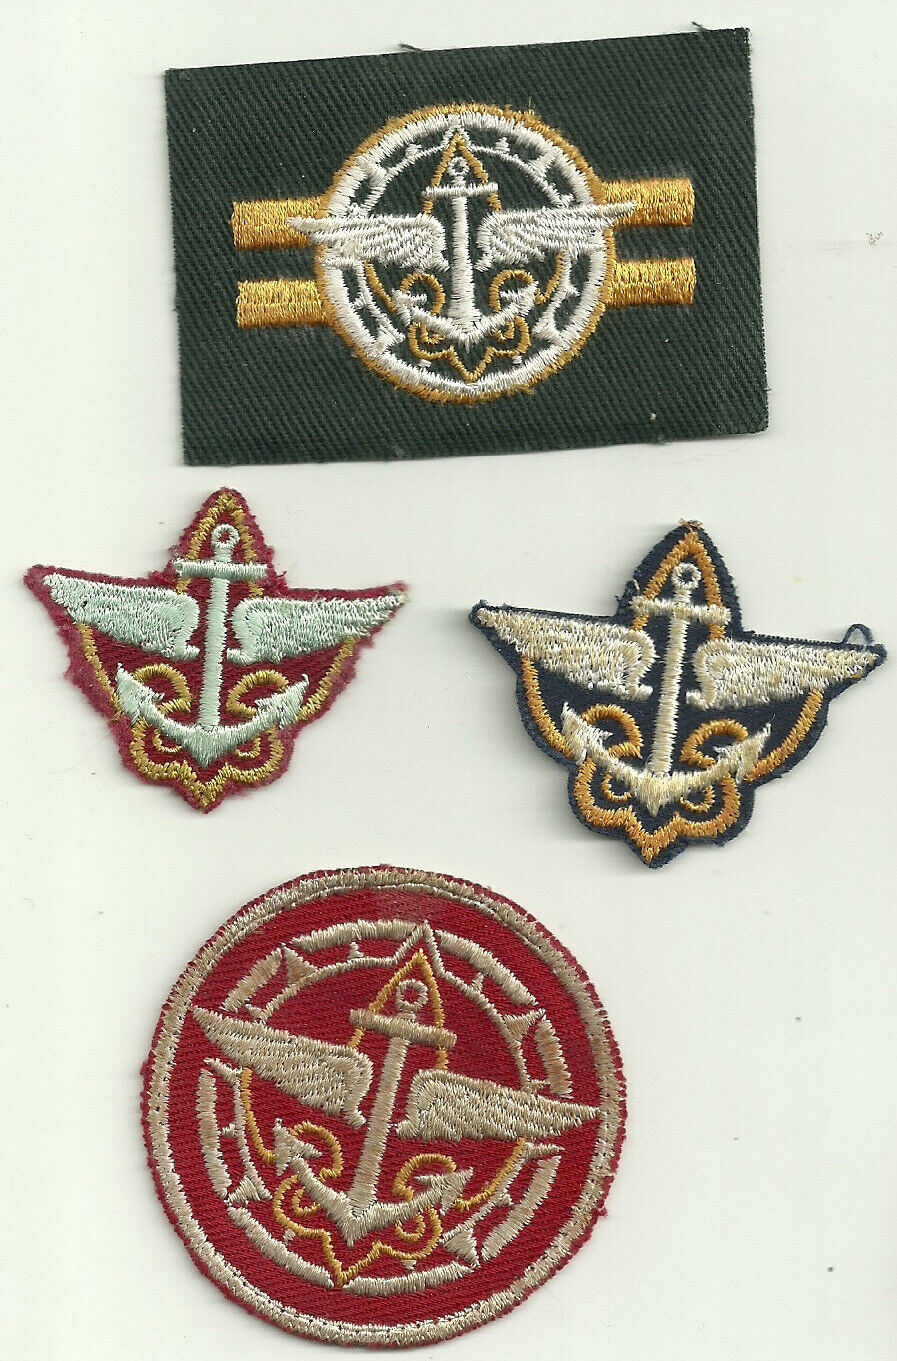 Group of 4 Explorer Sea Scout / Air Scout Patches